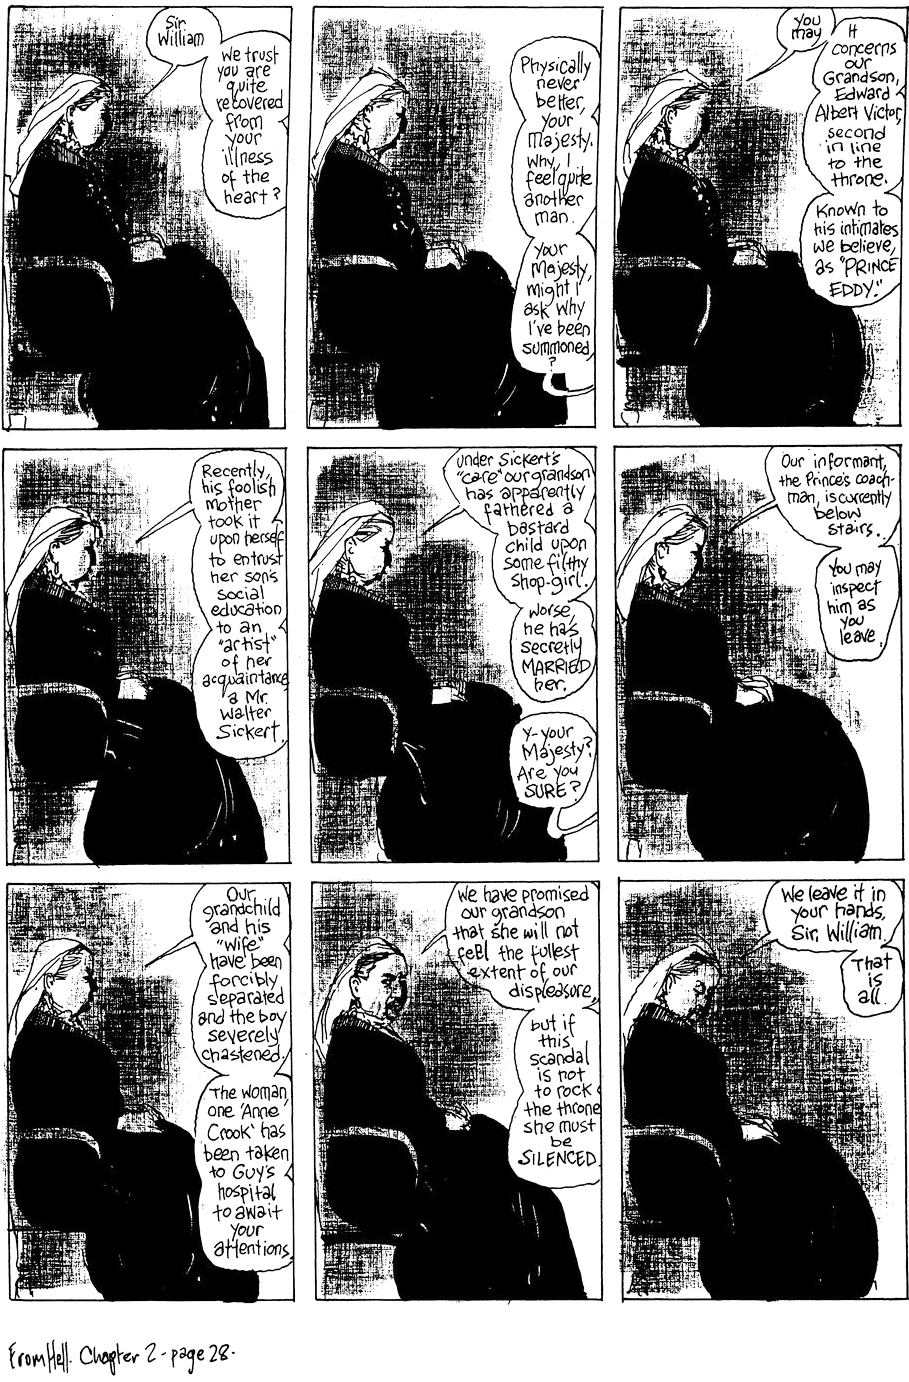 From Hell, (Eddie Campbell)